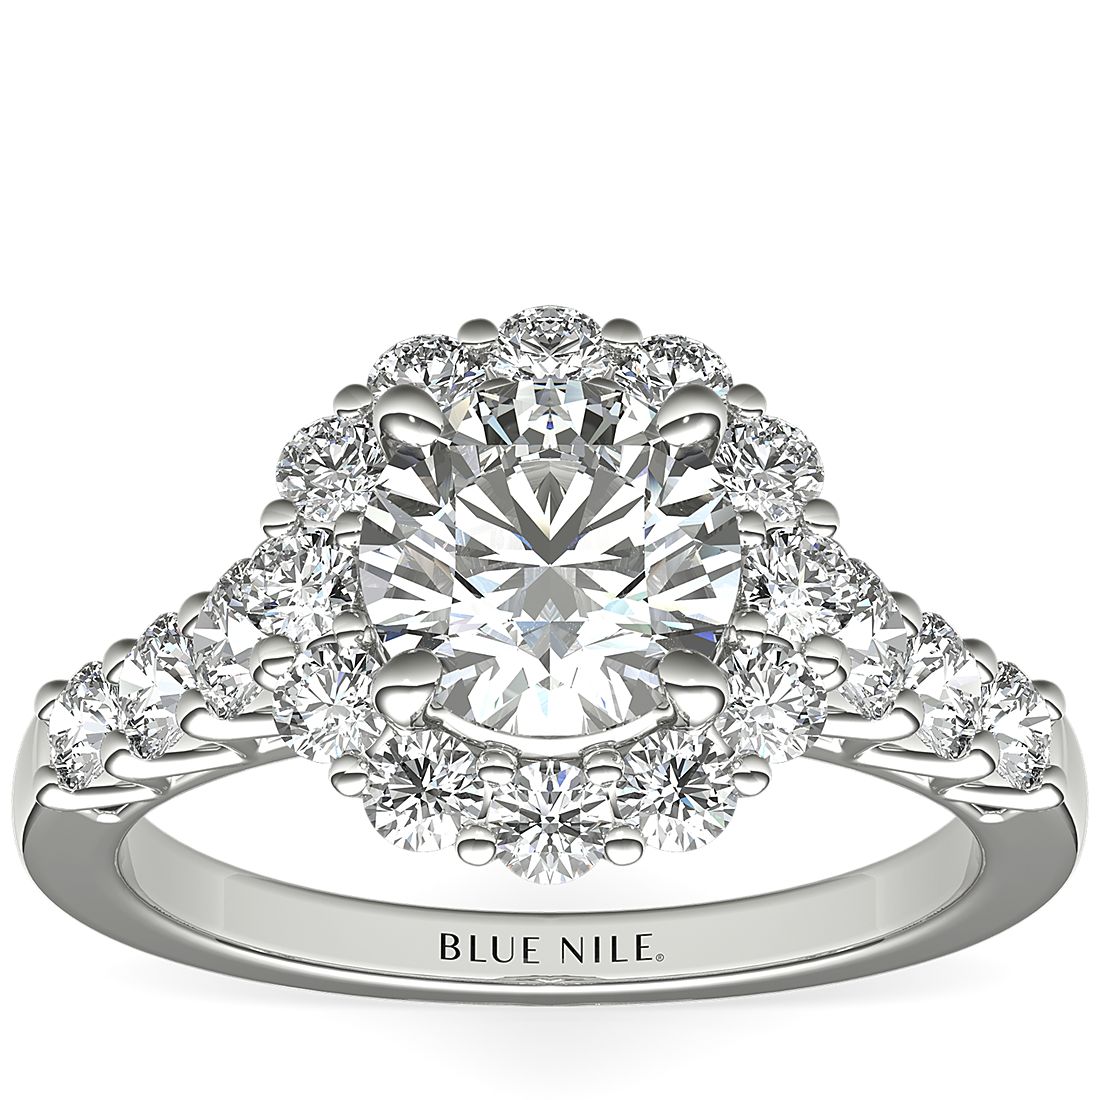 Build Your Own Ring Setting Details Blue Nile